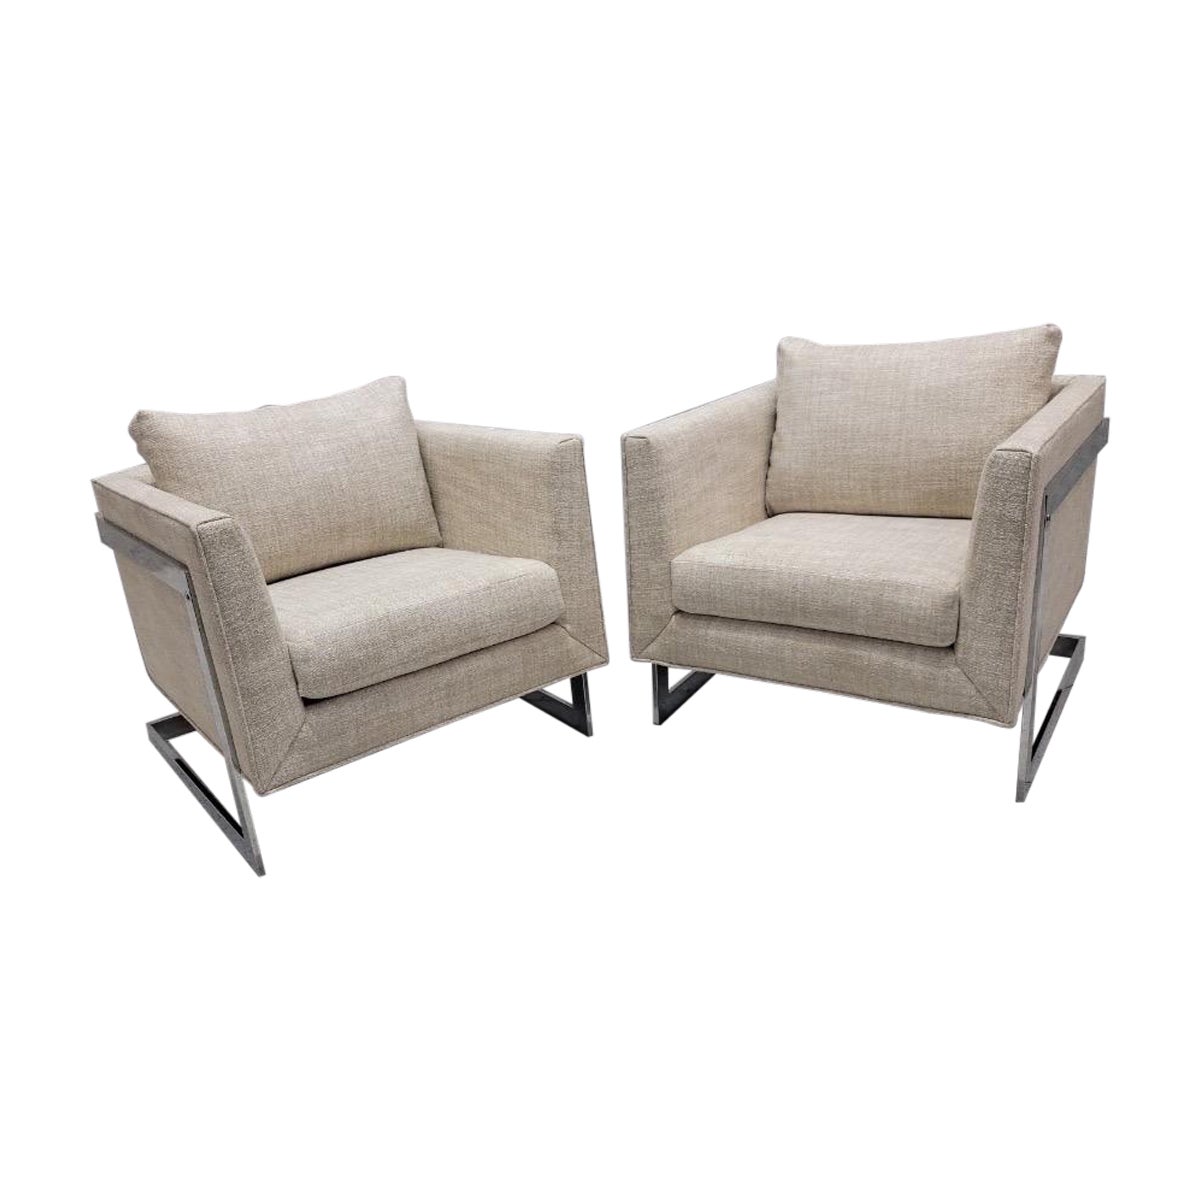 Mid Century Modern Newly Upholstered Milo Baughman Cantilever Club Chairs - Pair For Sale